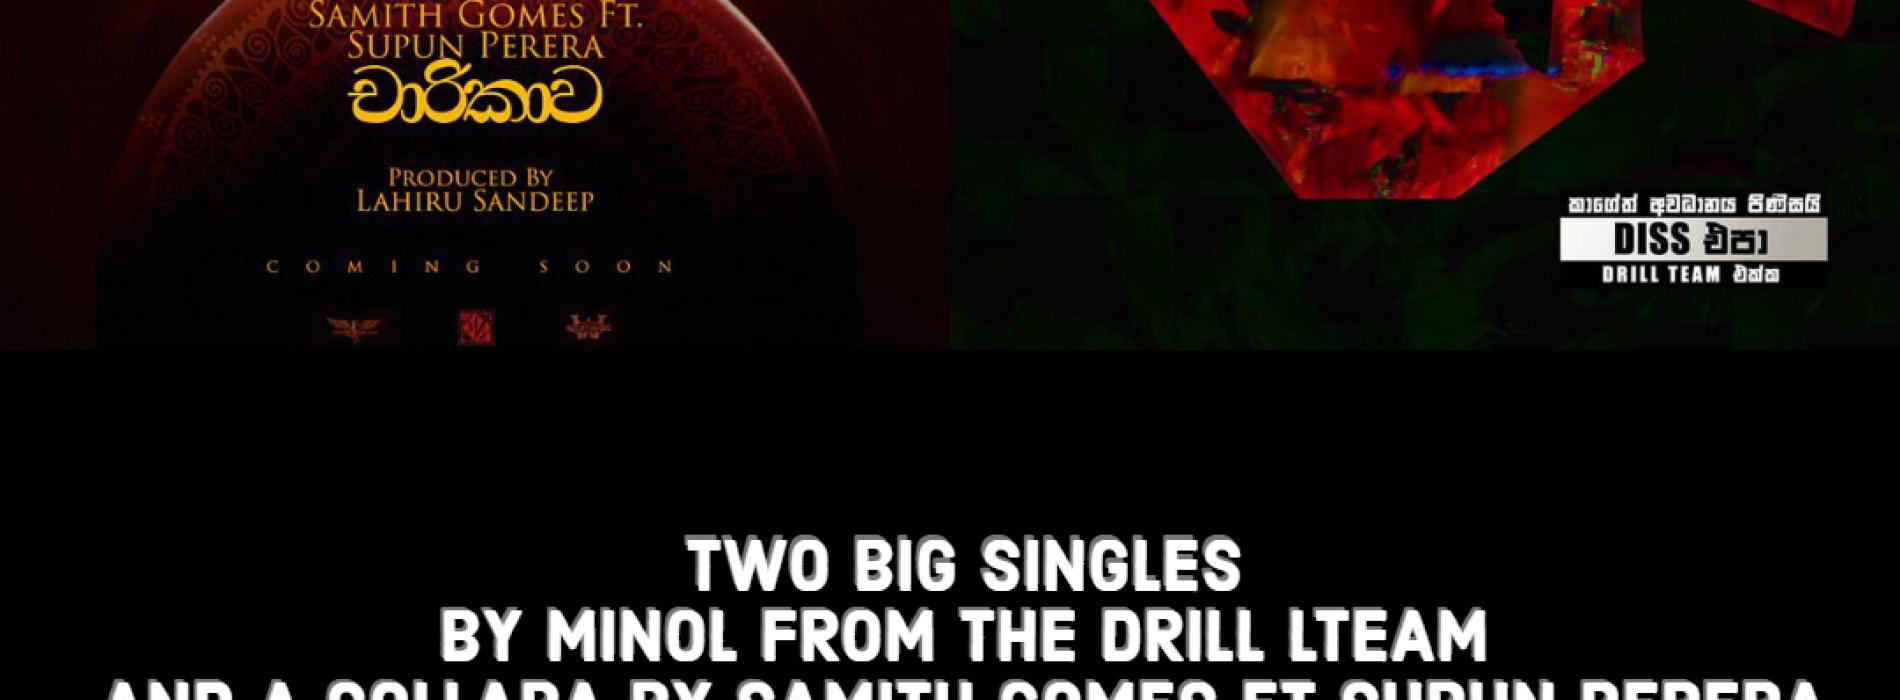 2 Big Singles Are Gonna Be Dropping Soon!